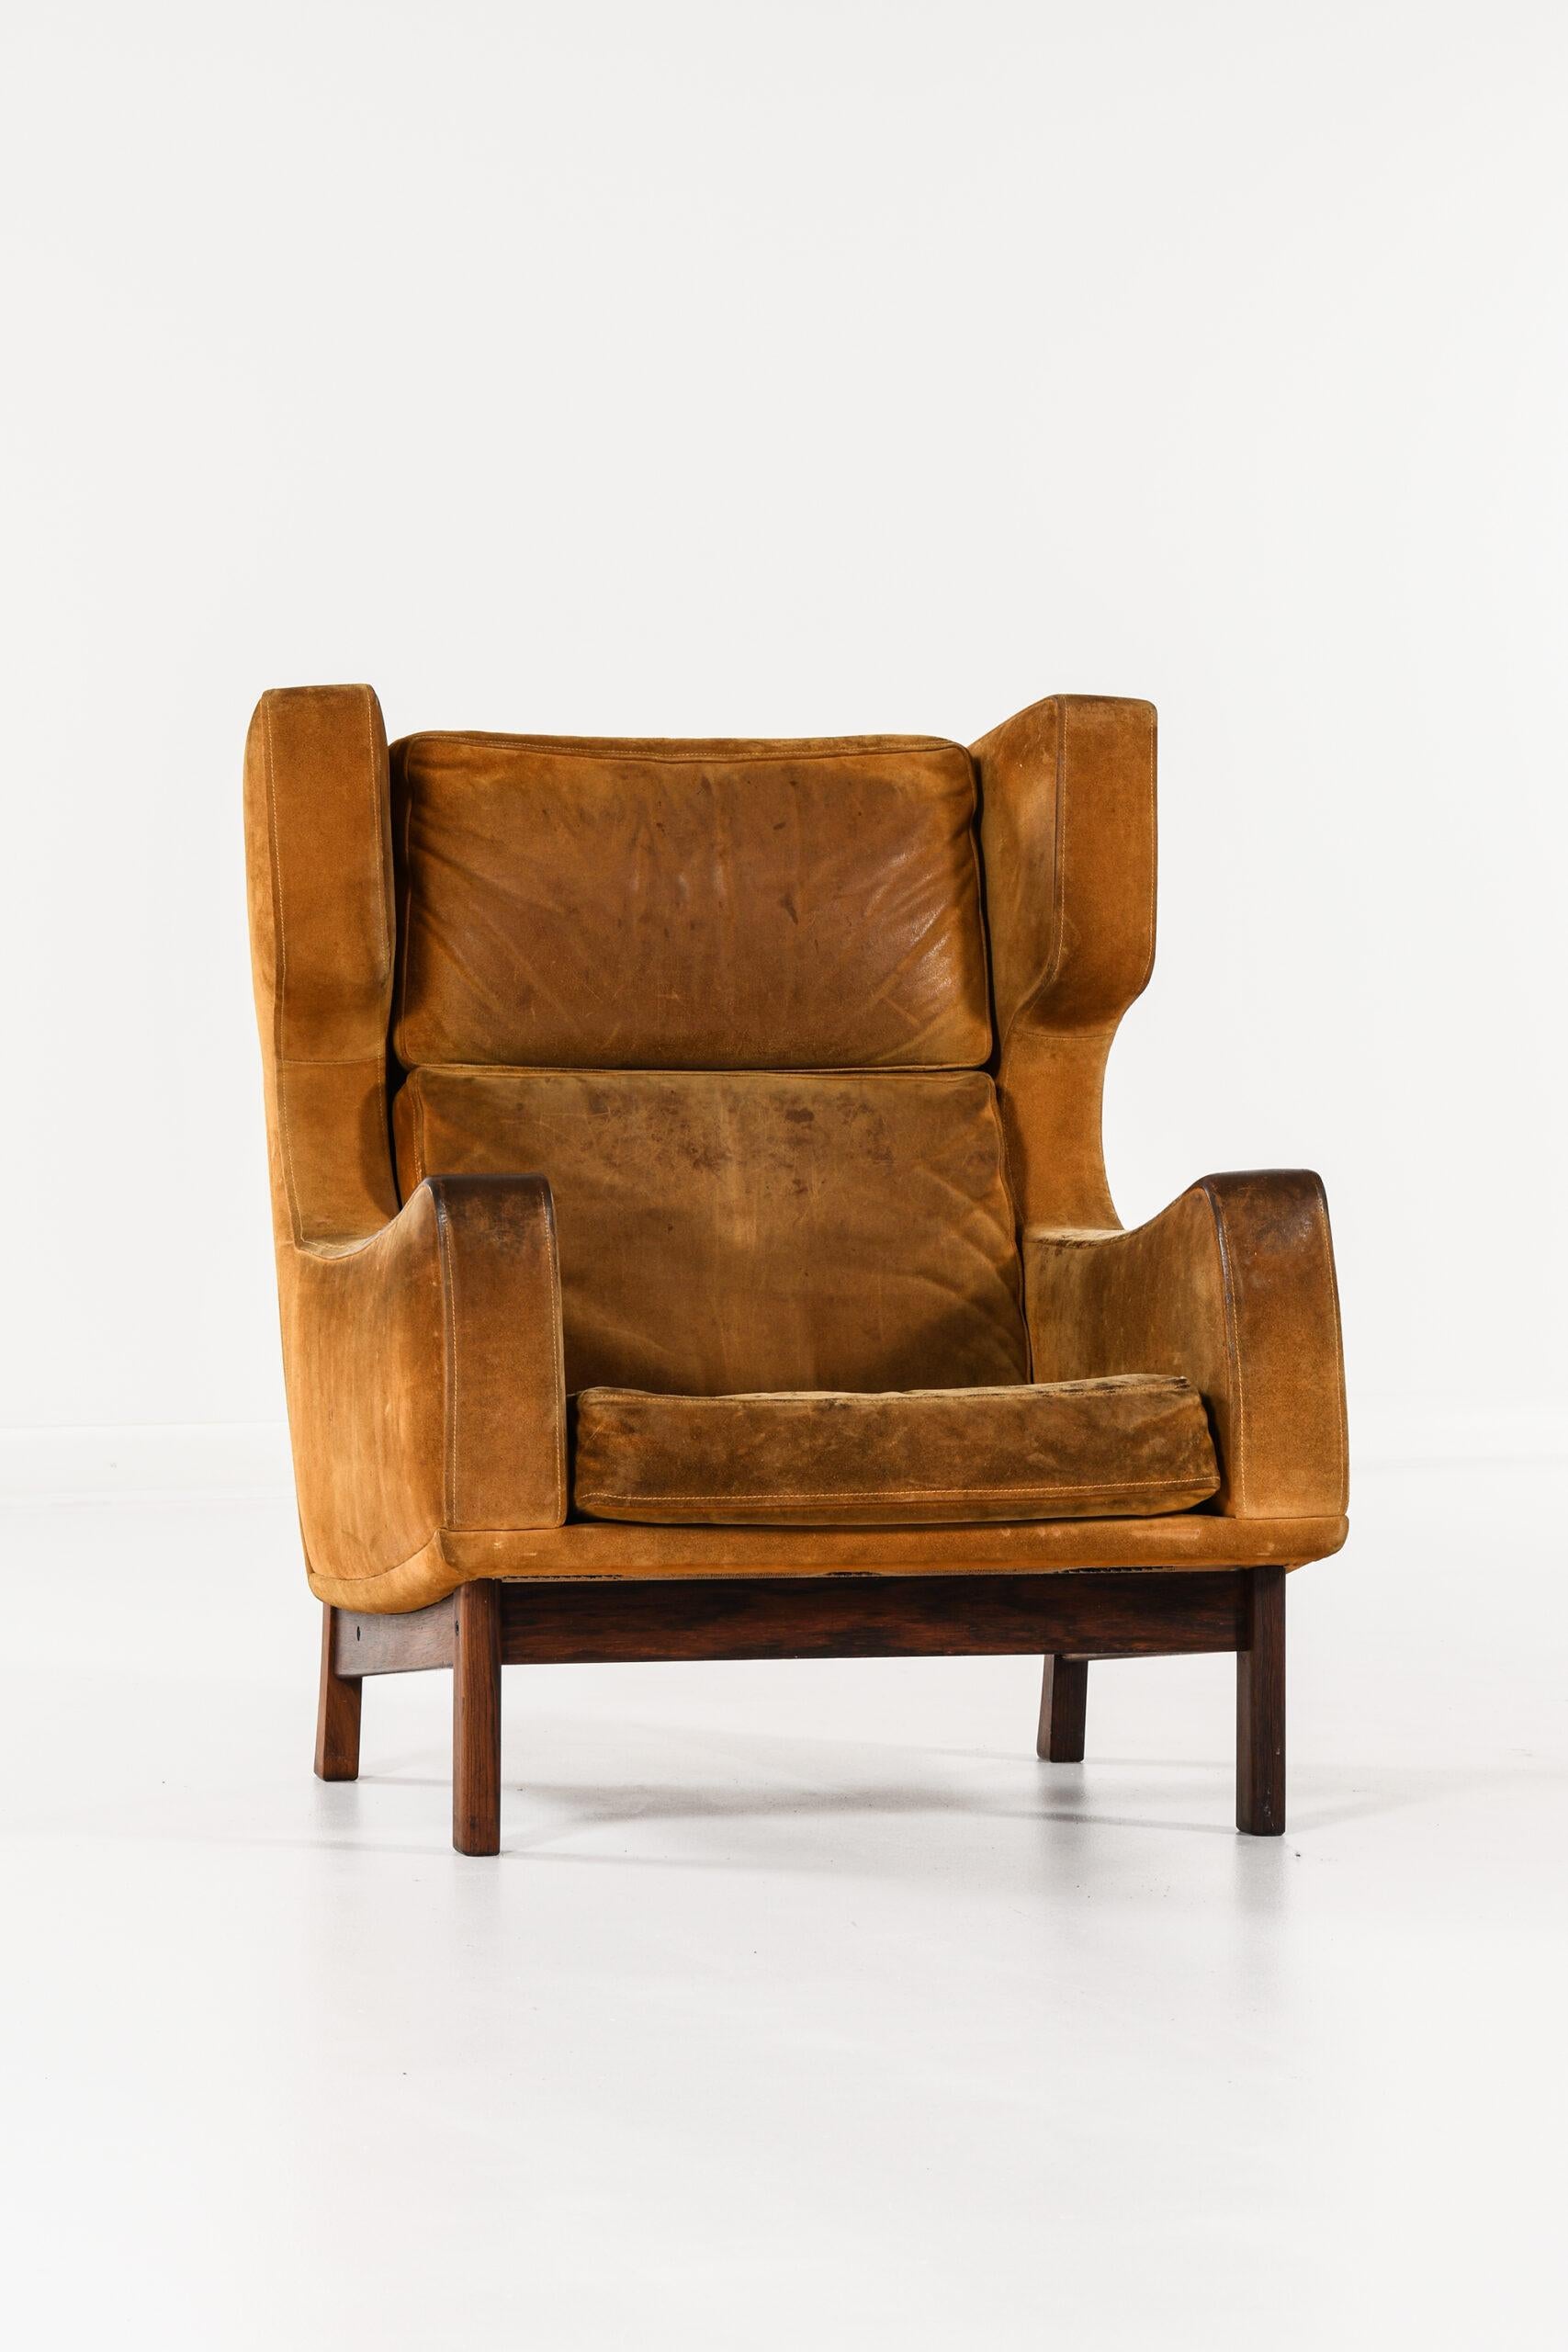 Very rare wingback easy chair by unknown designer. Produced in Denmark.